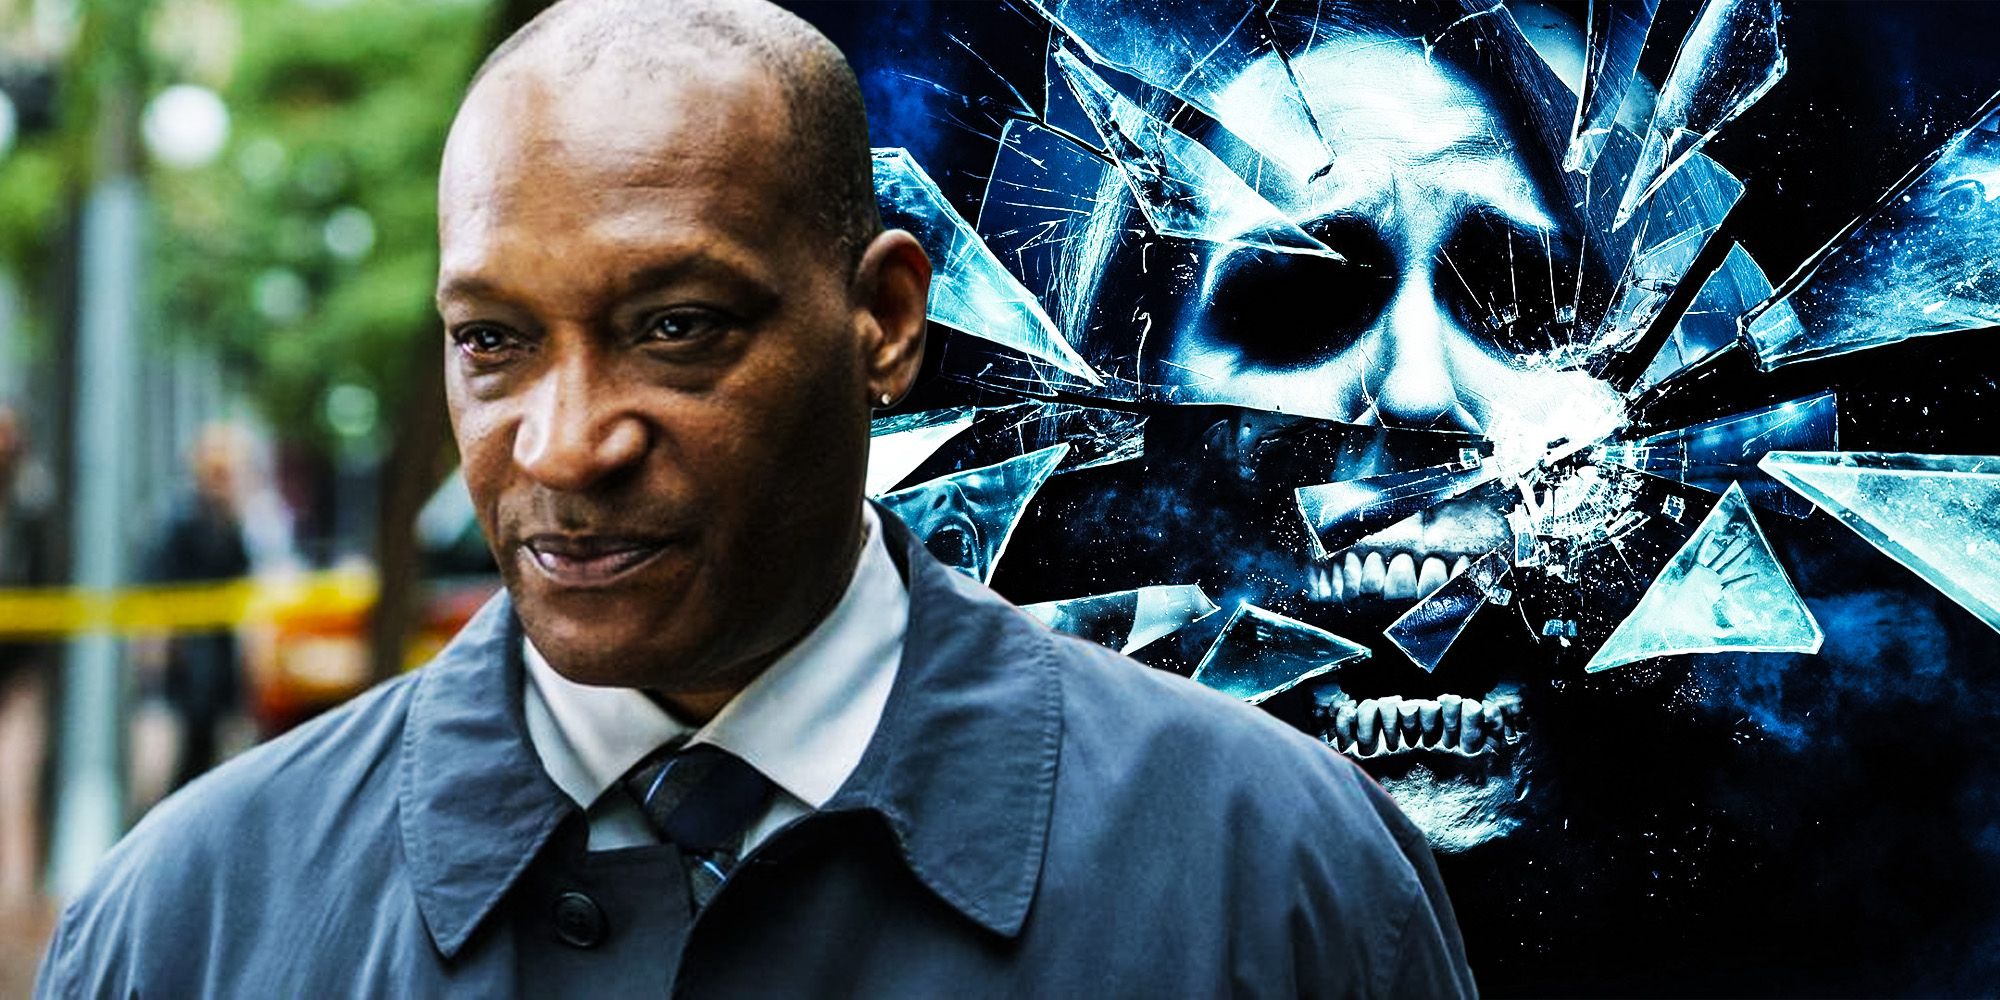 A blended image features Tony Todd in front of a skull through splintering glass